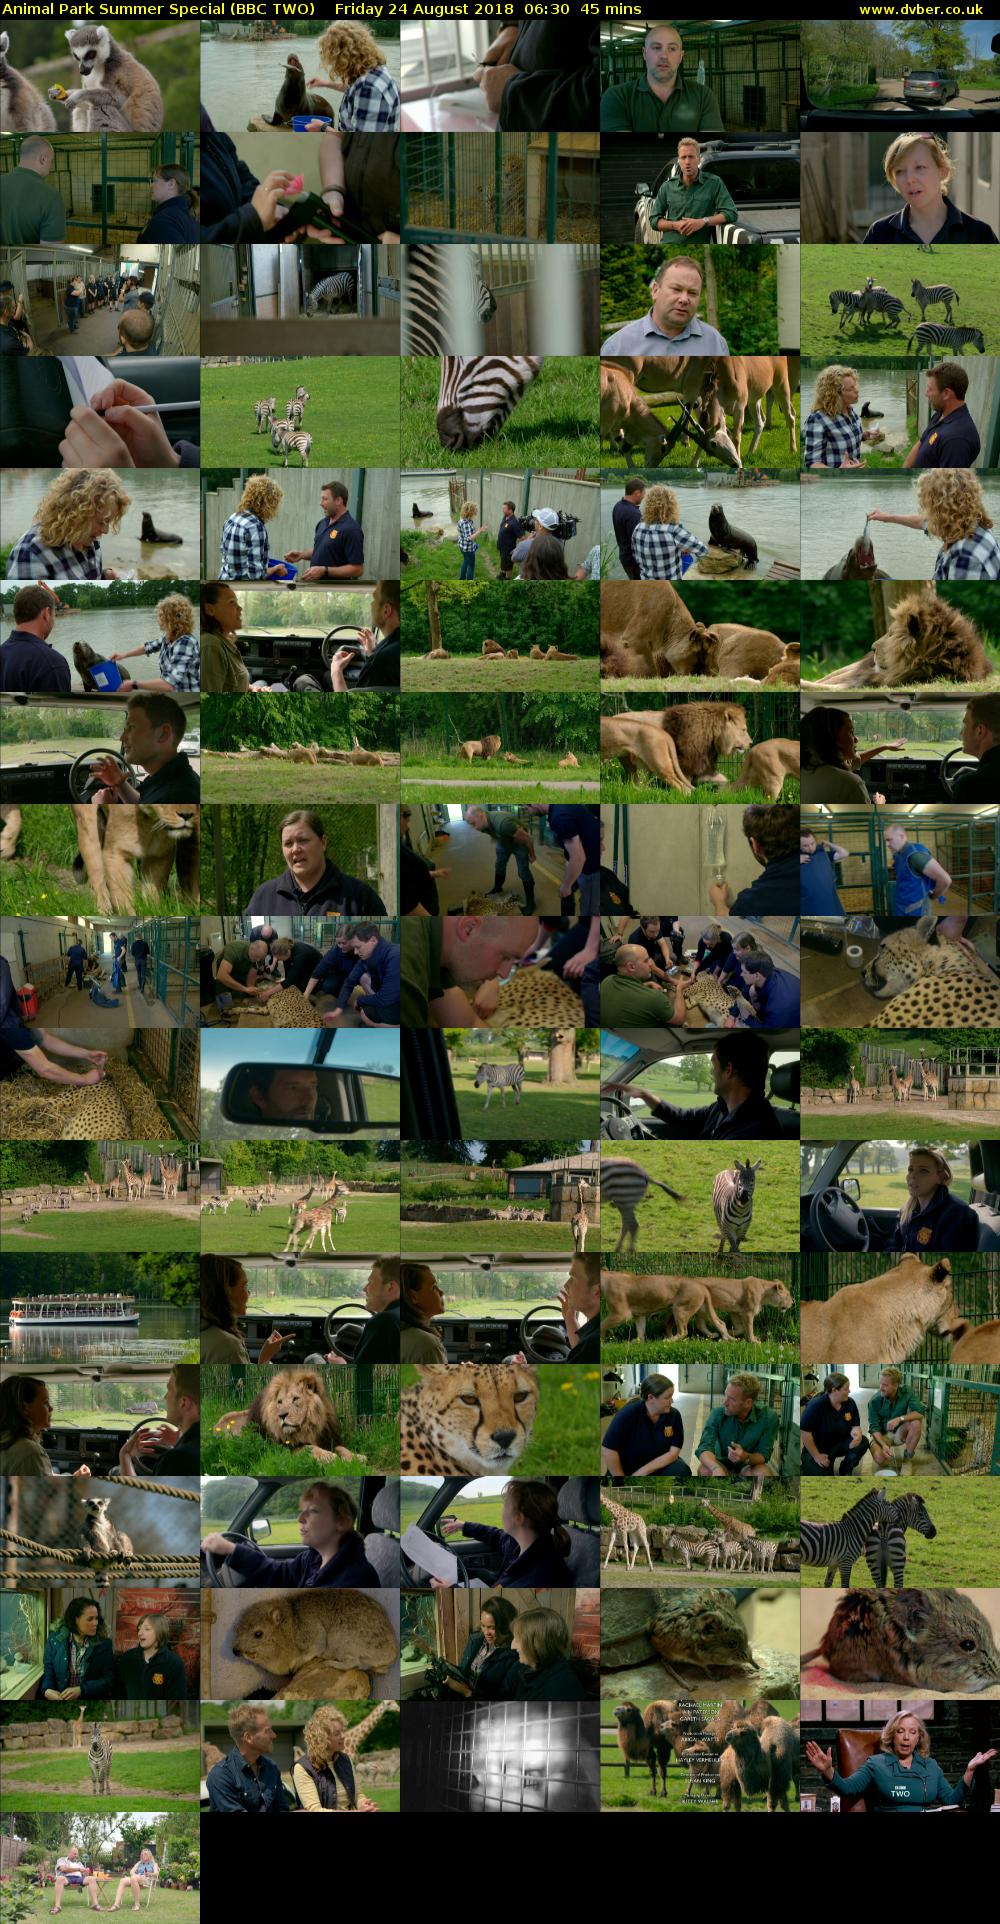 Animal Park Summer Special (BBC TWO) Friday 24 August 2018 06:30 - 07:15